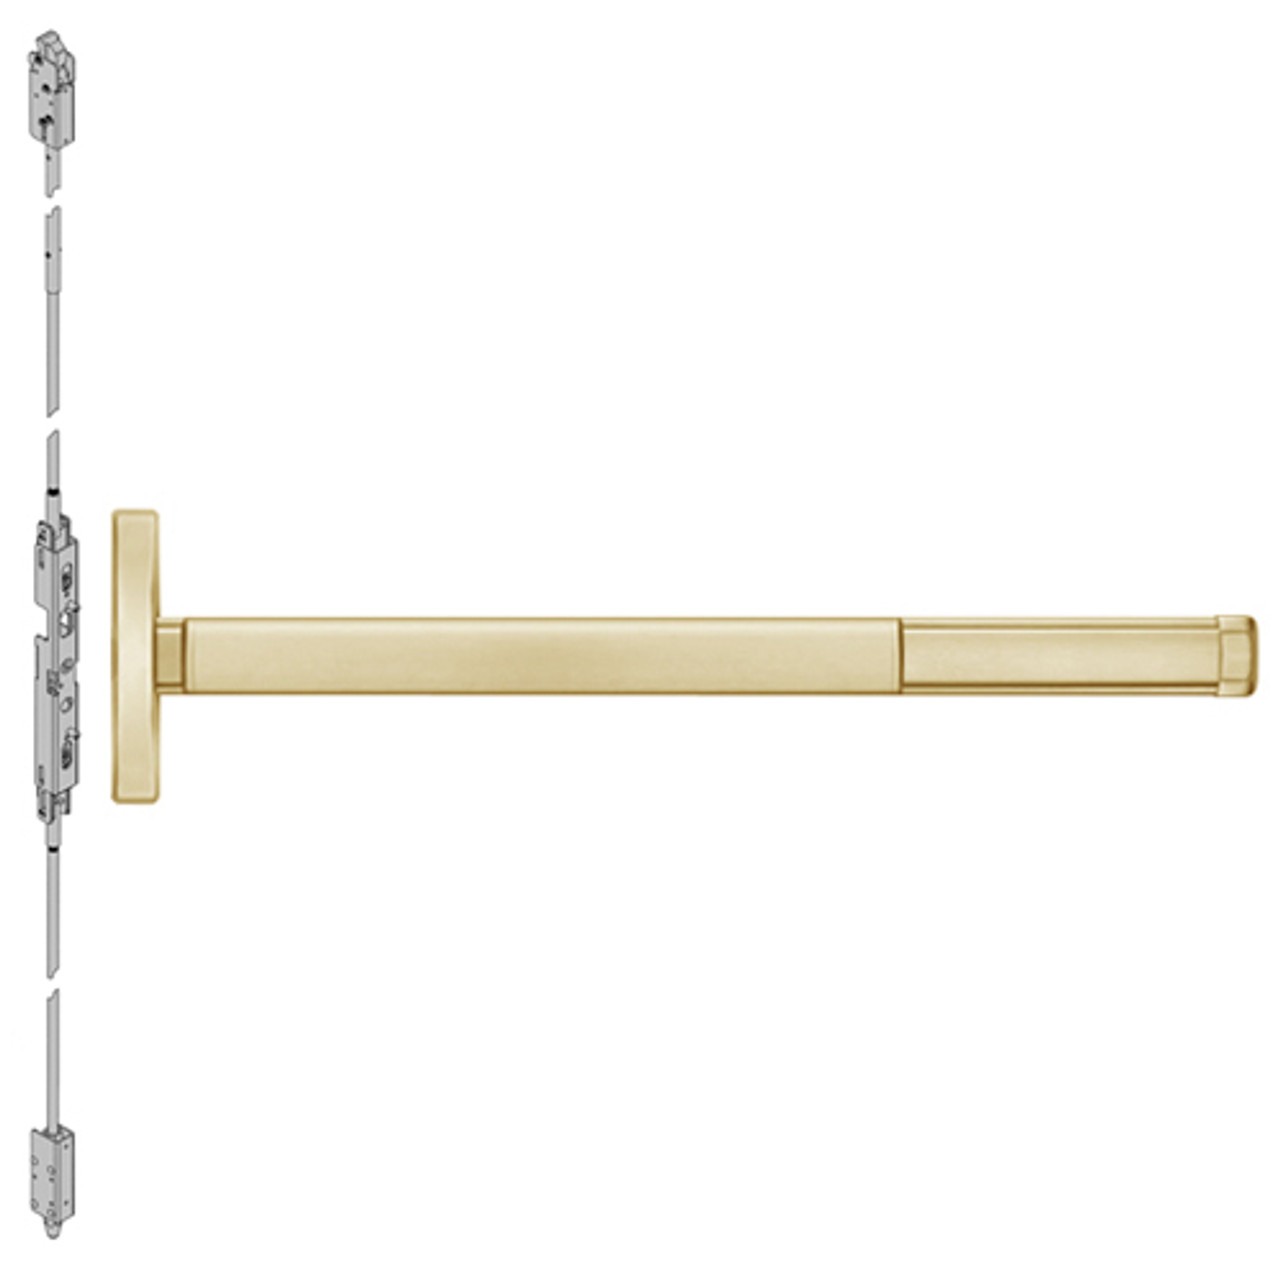 ELRFL2602-606-36 PHI 2600 Series Fire Rated Concealed Vertical Rod Exit Device with Electric Latch Retraction Prepped for Dummy Trim in Satin Brass Finish